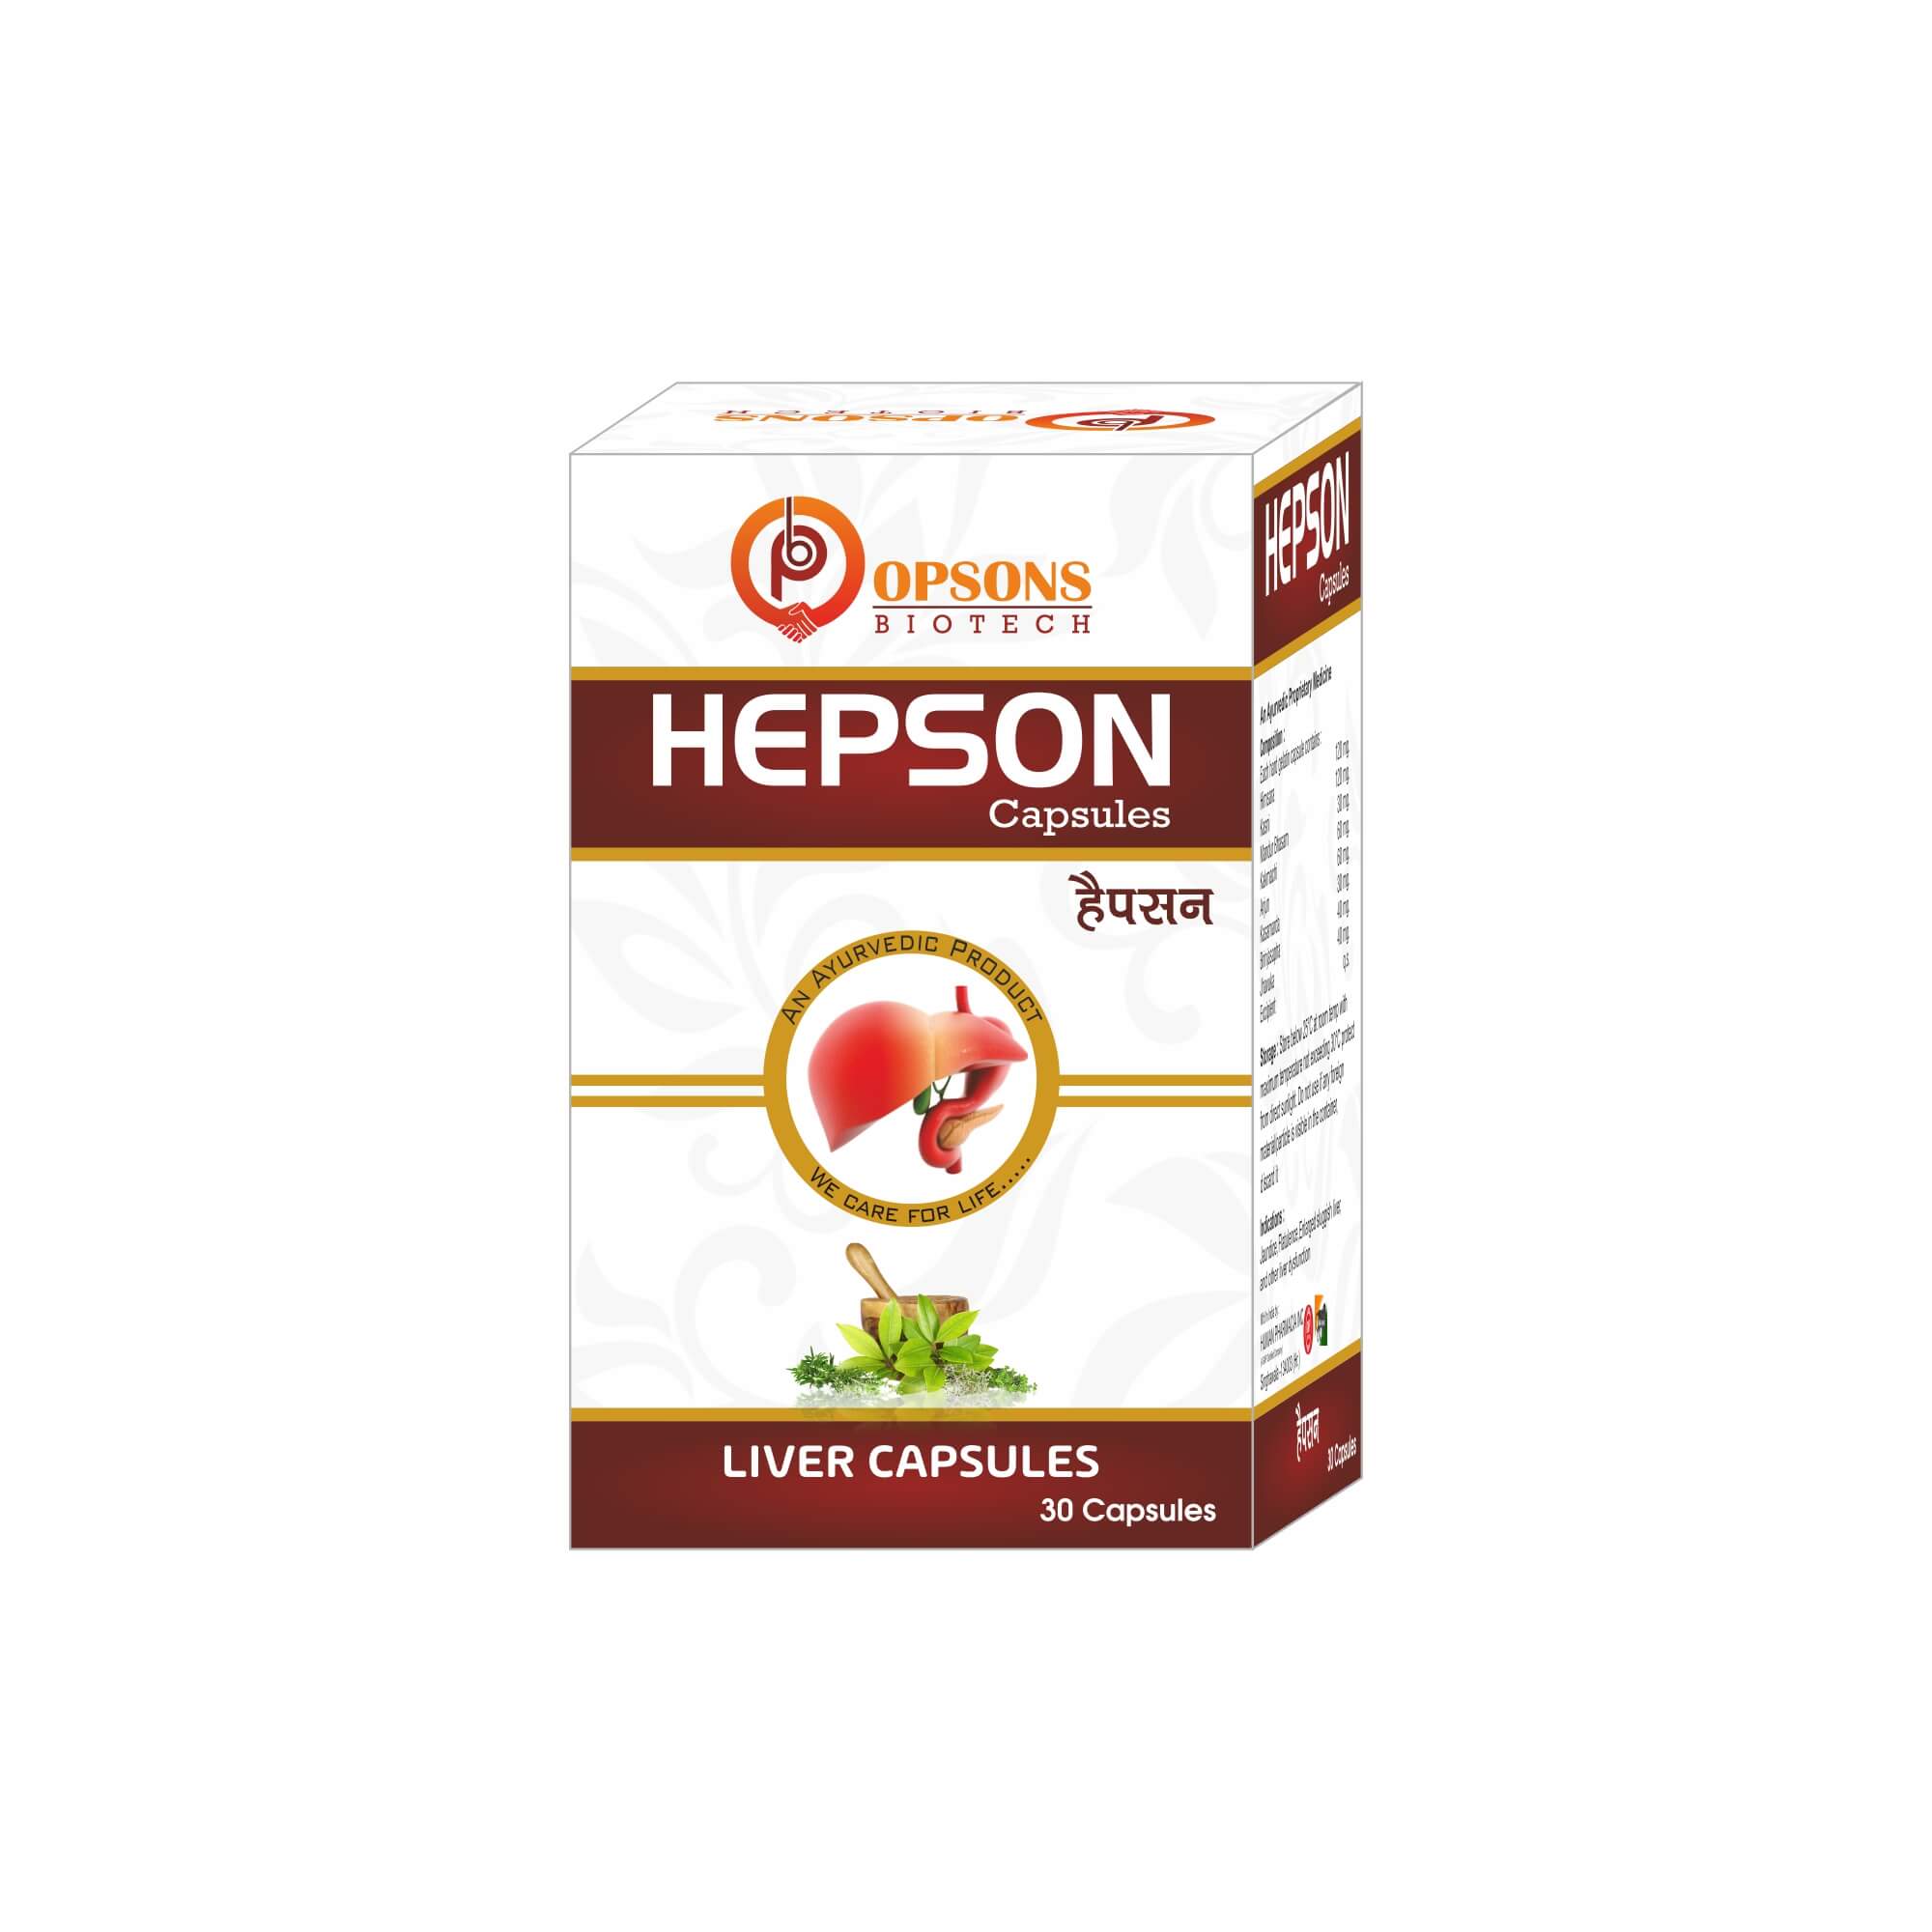 Product Name: Hepson Capsules, Compositions of Hepson Capsules are Liver Capsules - Opsons Biotech